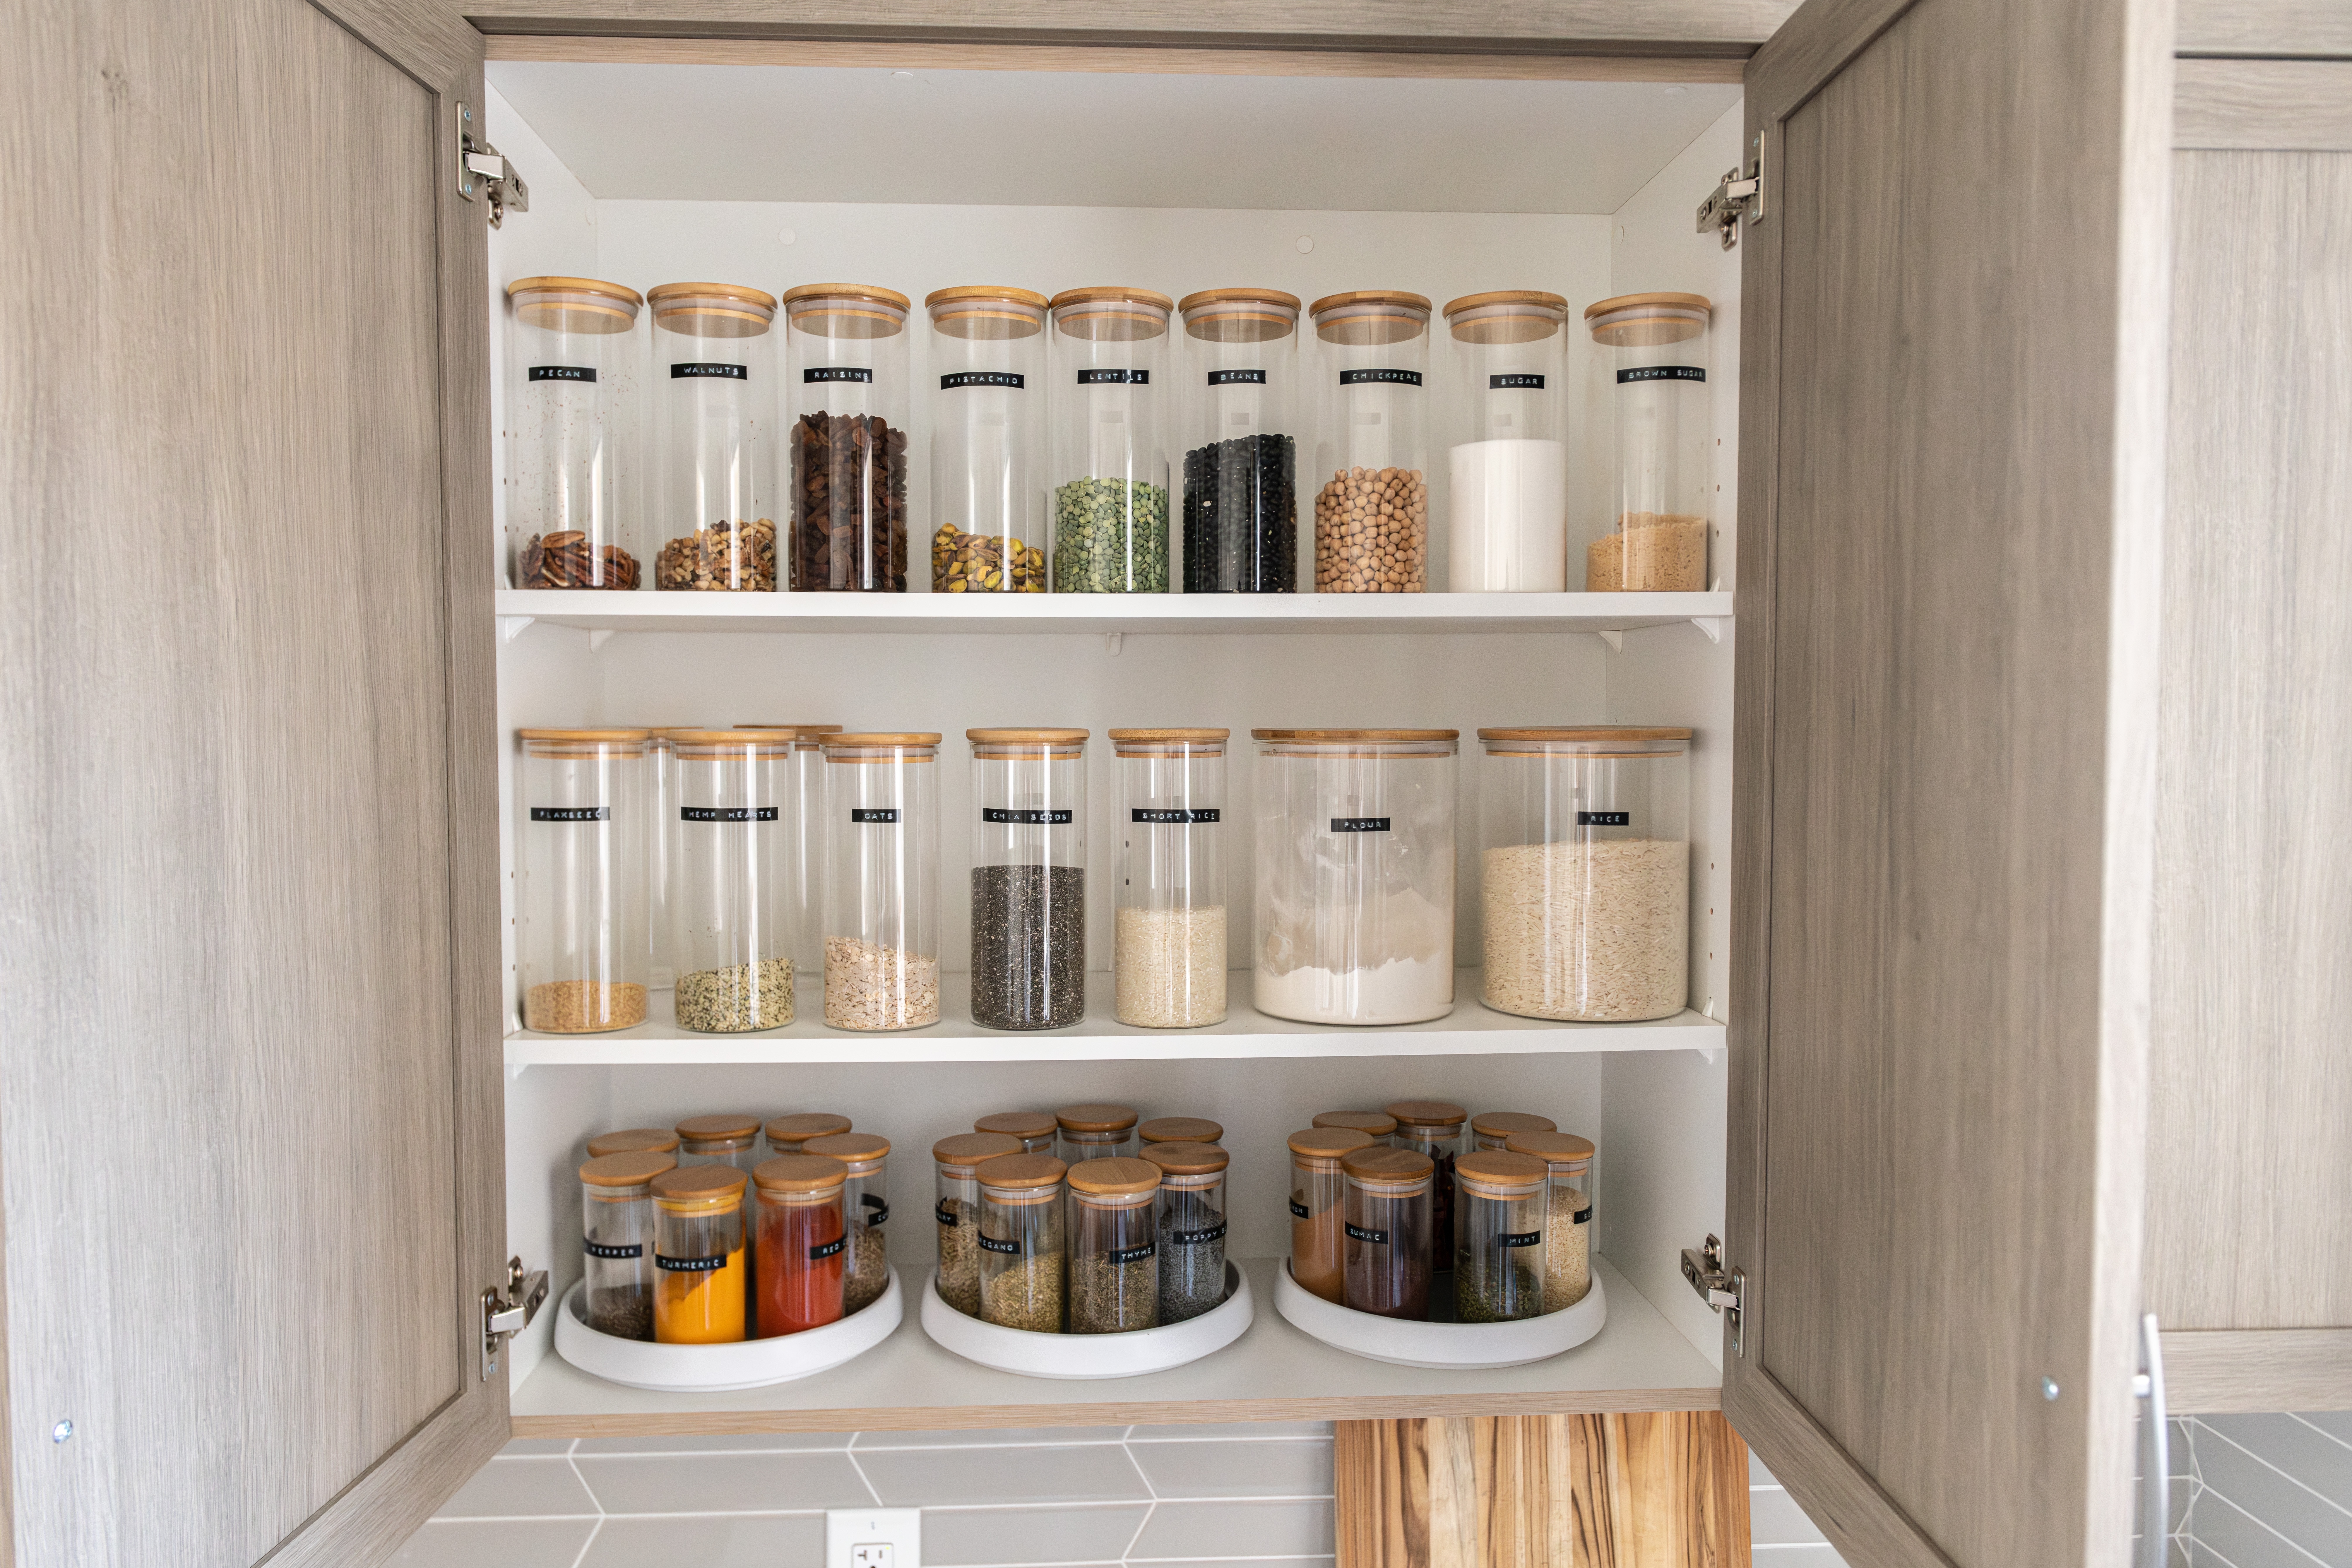 Organized pantry, jars with labels.